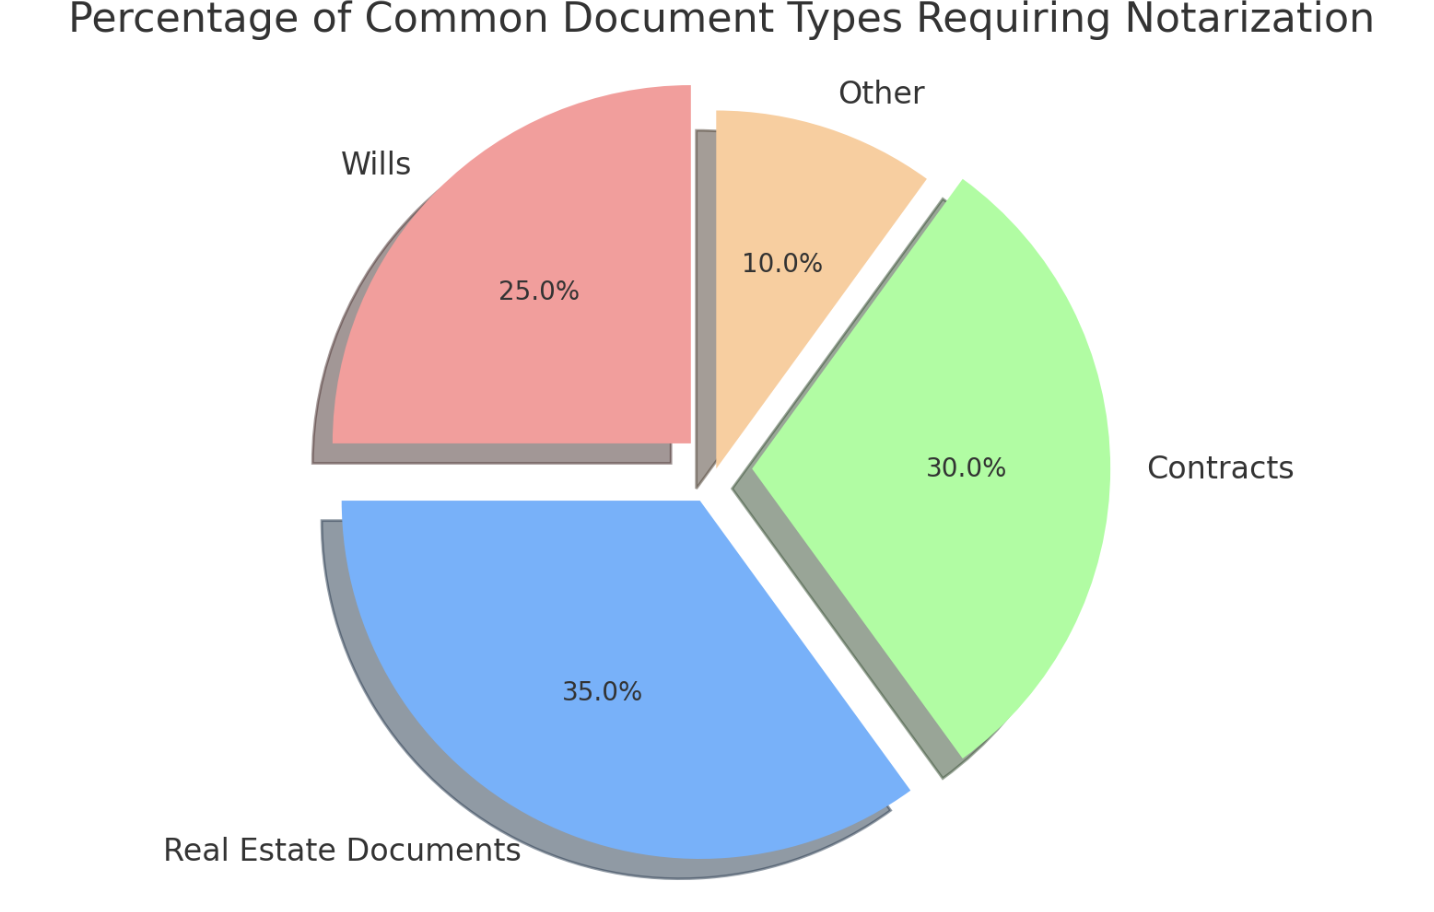 Common Types of Documents That Require Notarization